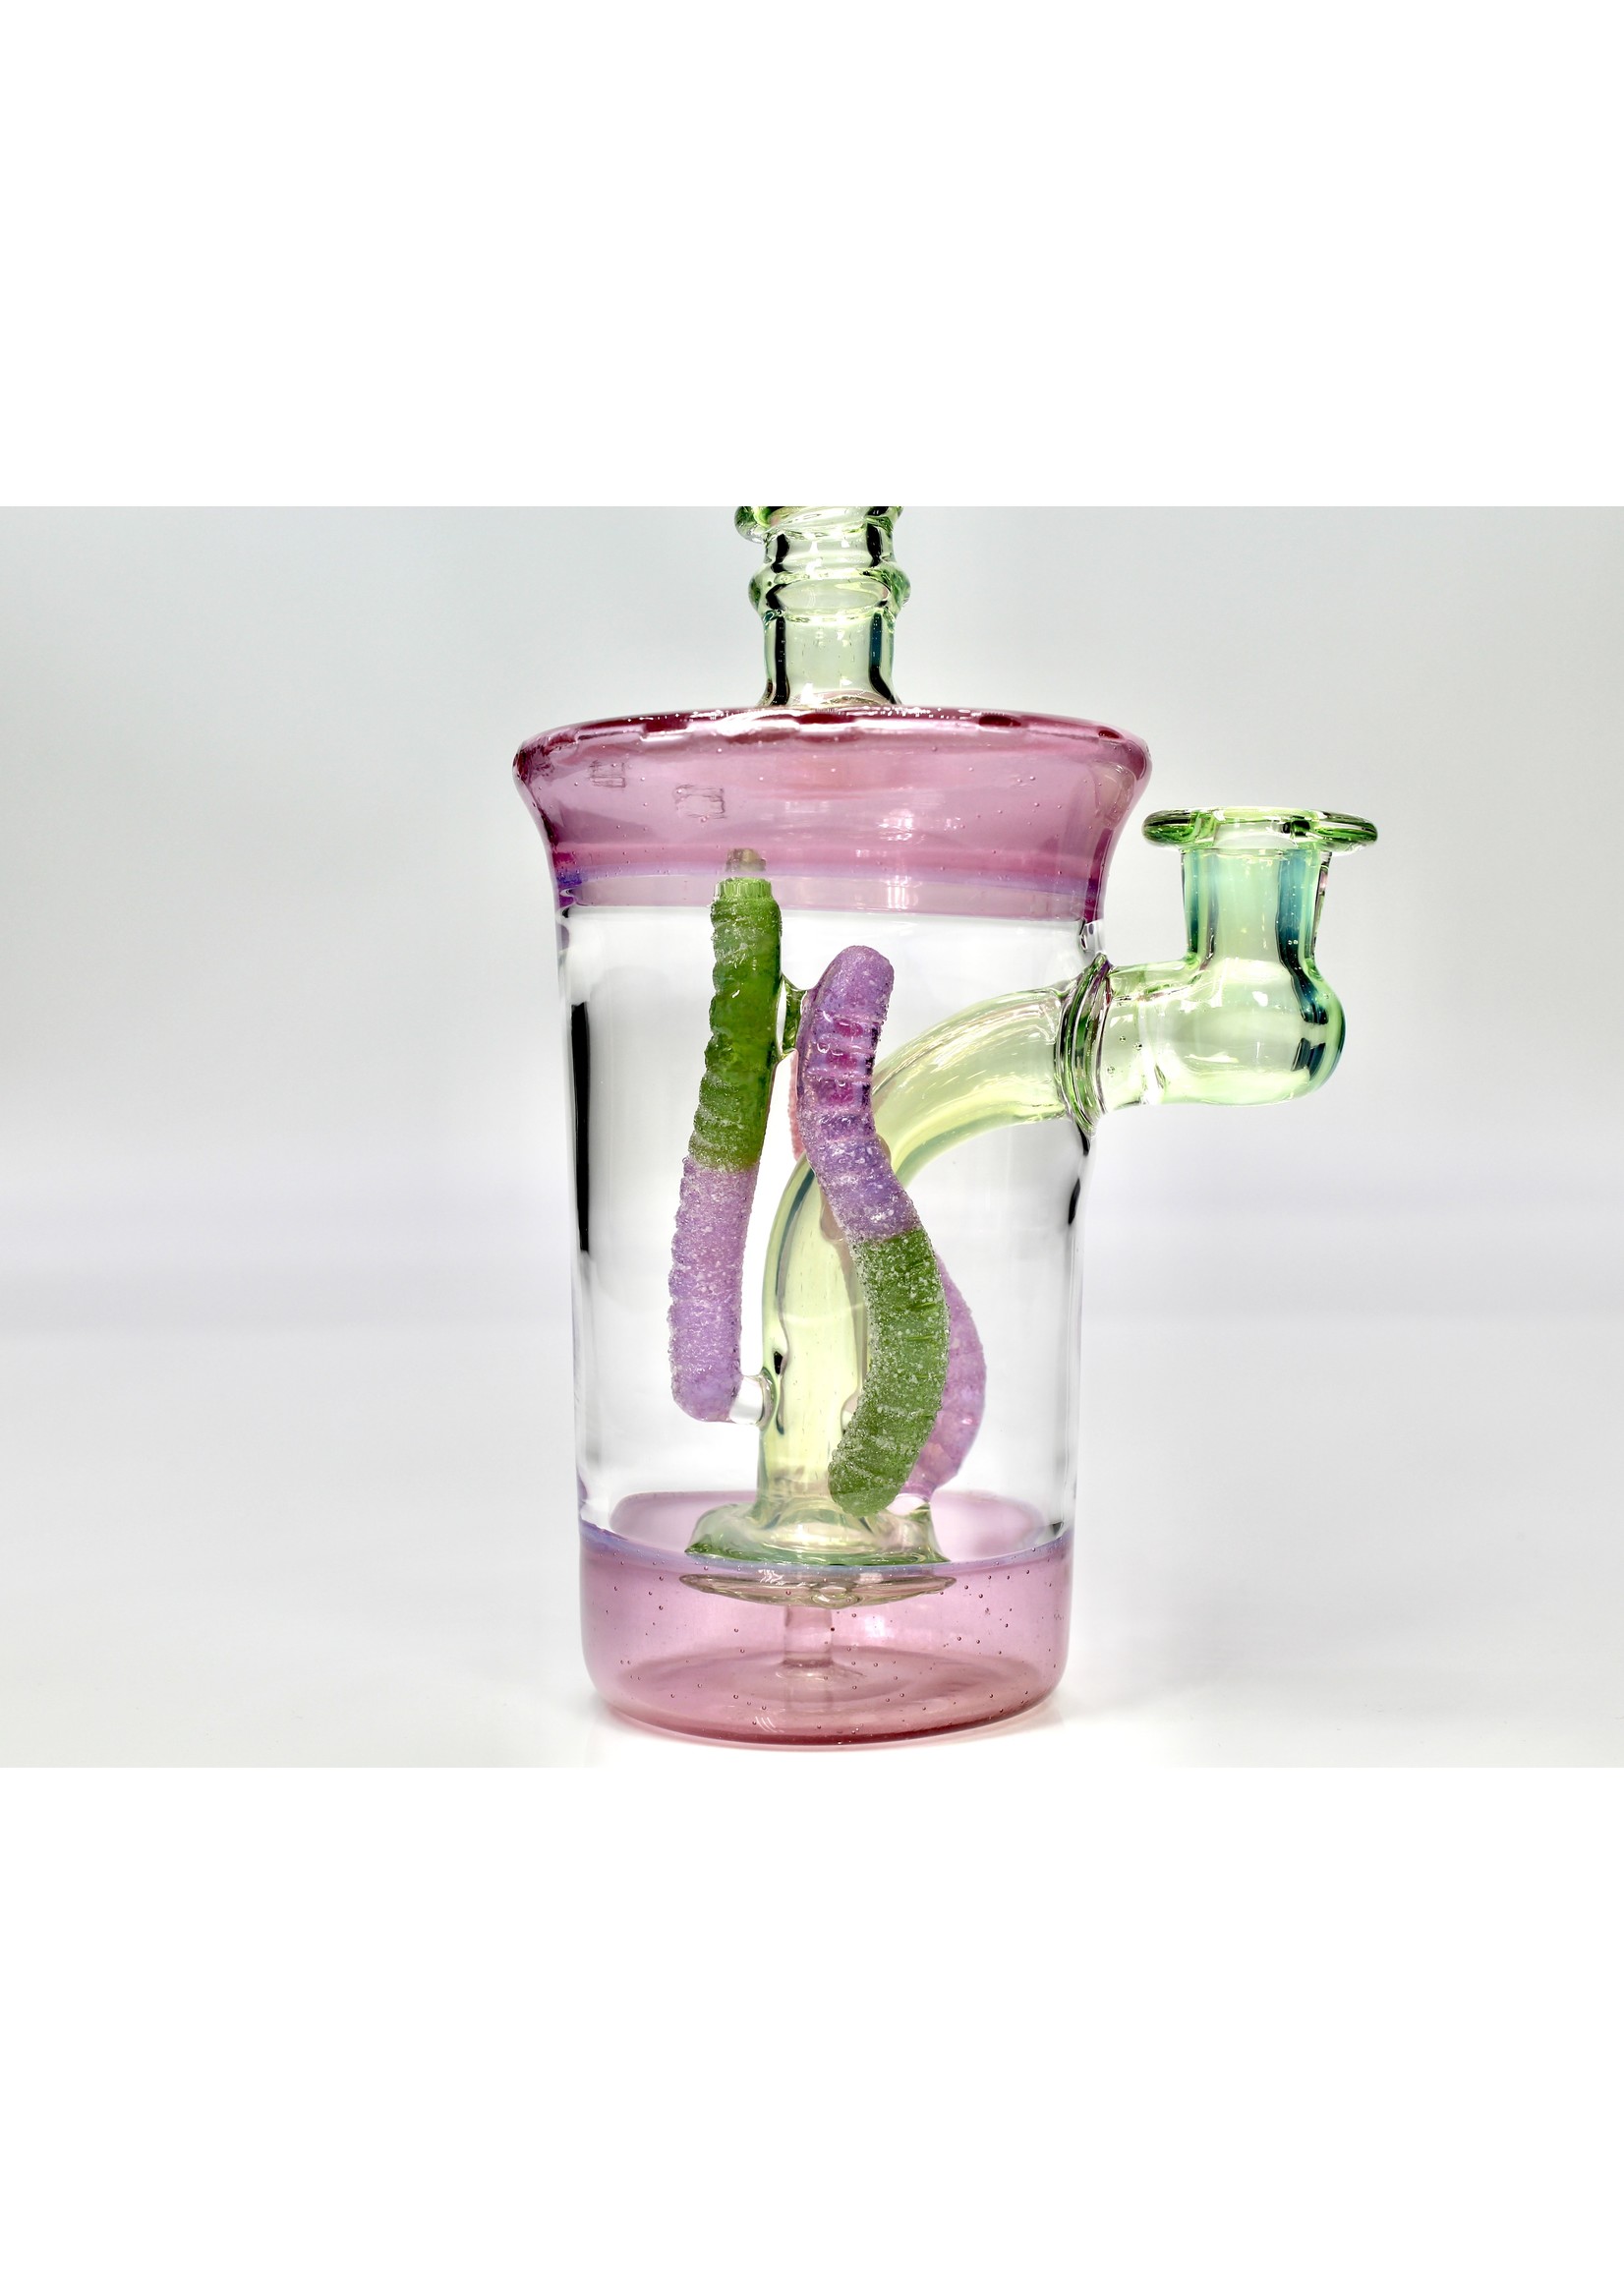 Emperial Glass Emperial Glass Cup Rig #2